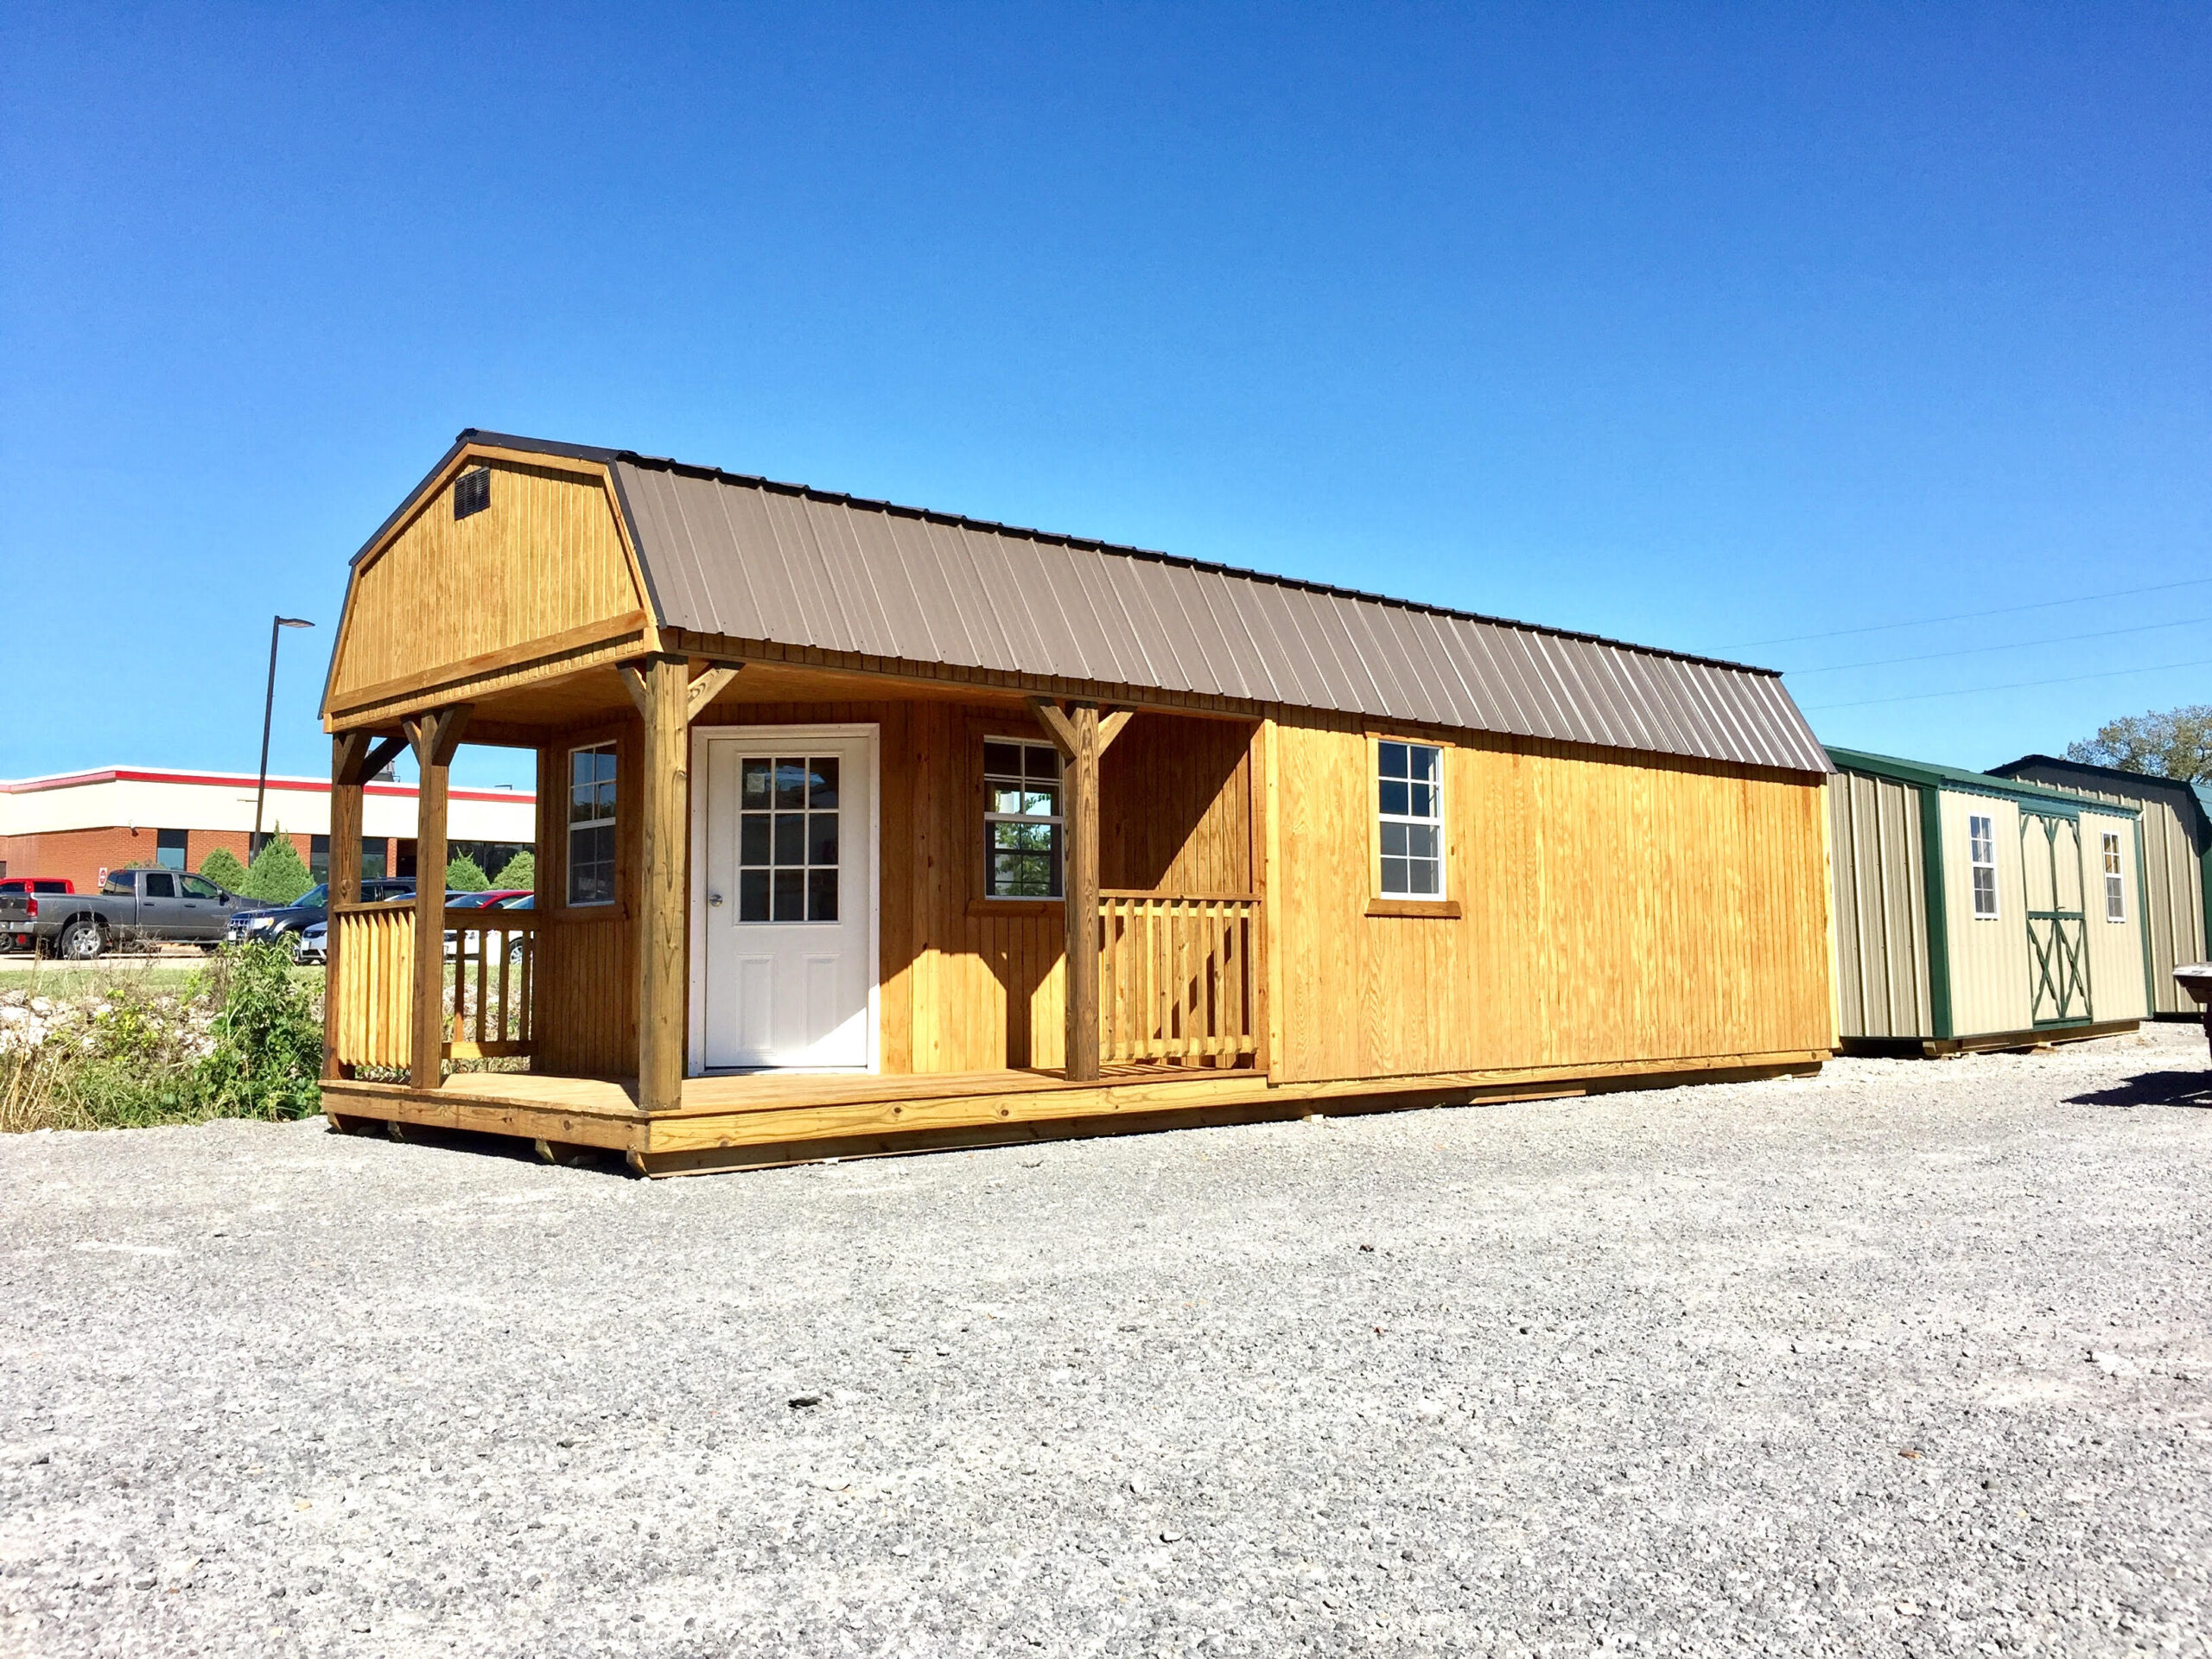 Premium lofted barn cabin with treated siding and wrap around porch